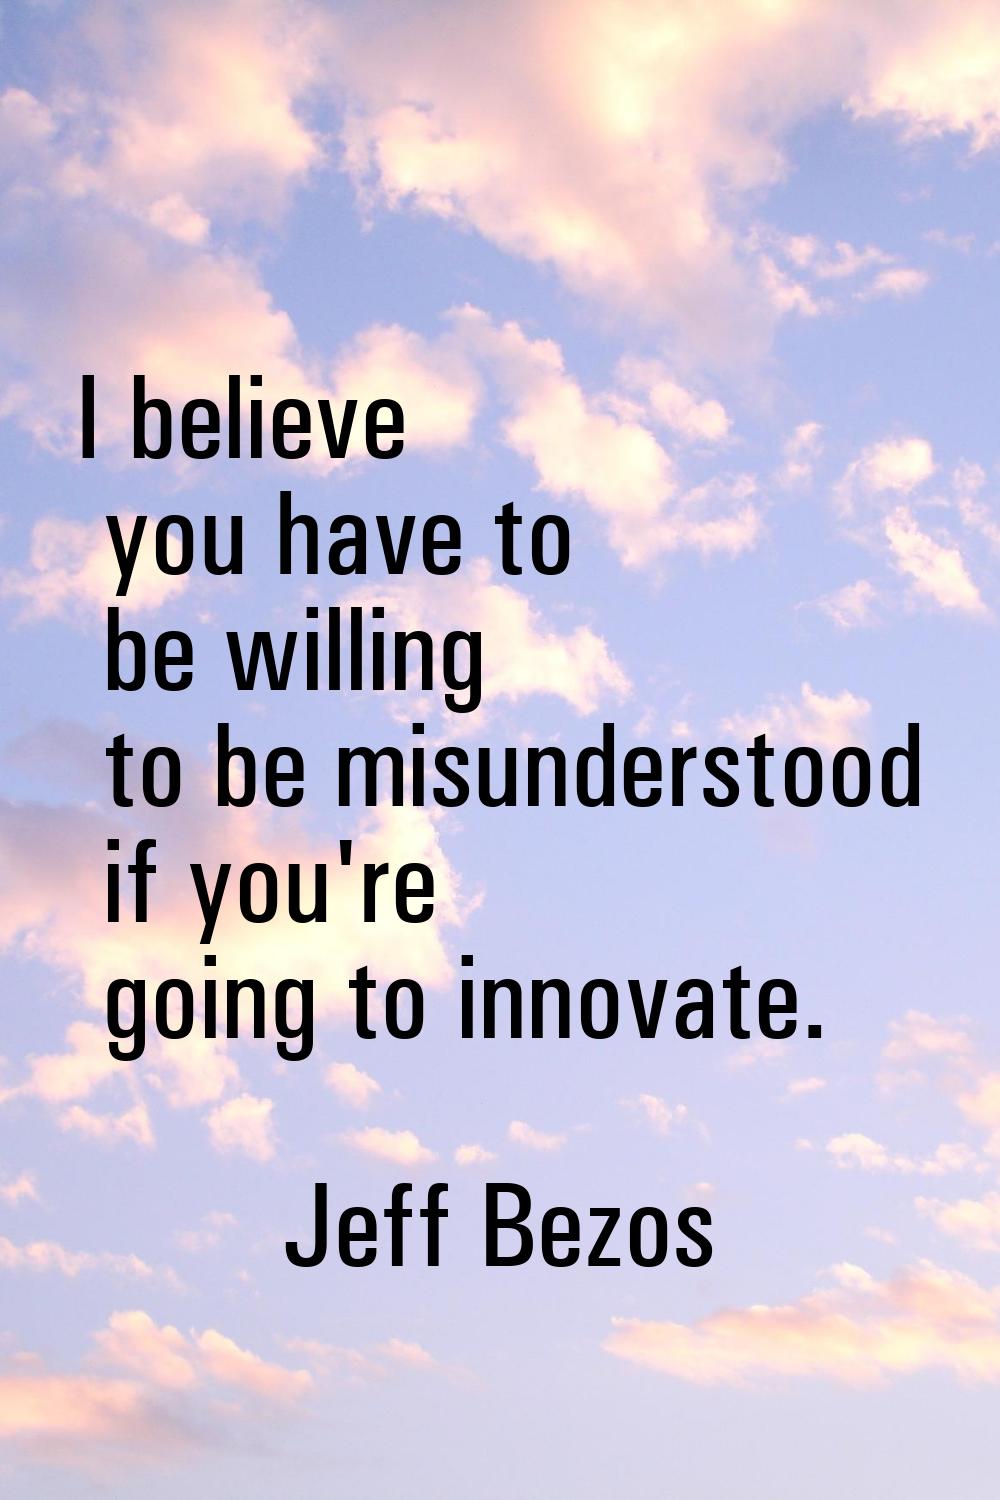 I believe you have to be willing to be misunderstood if you're going to innovate.